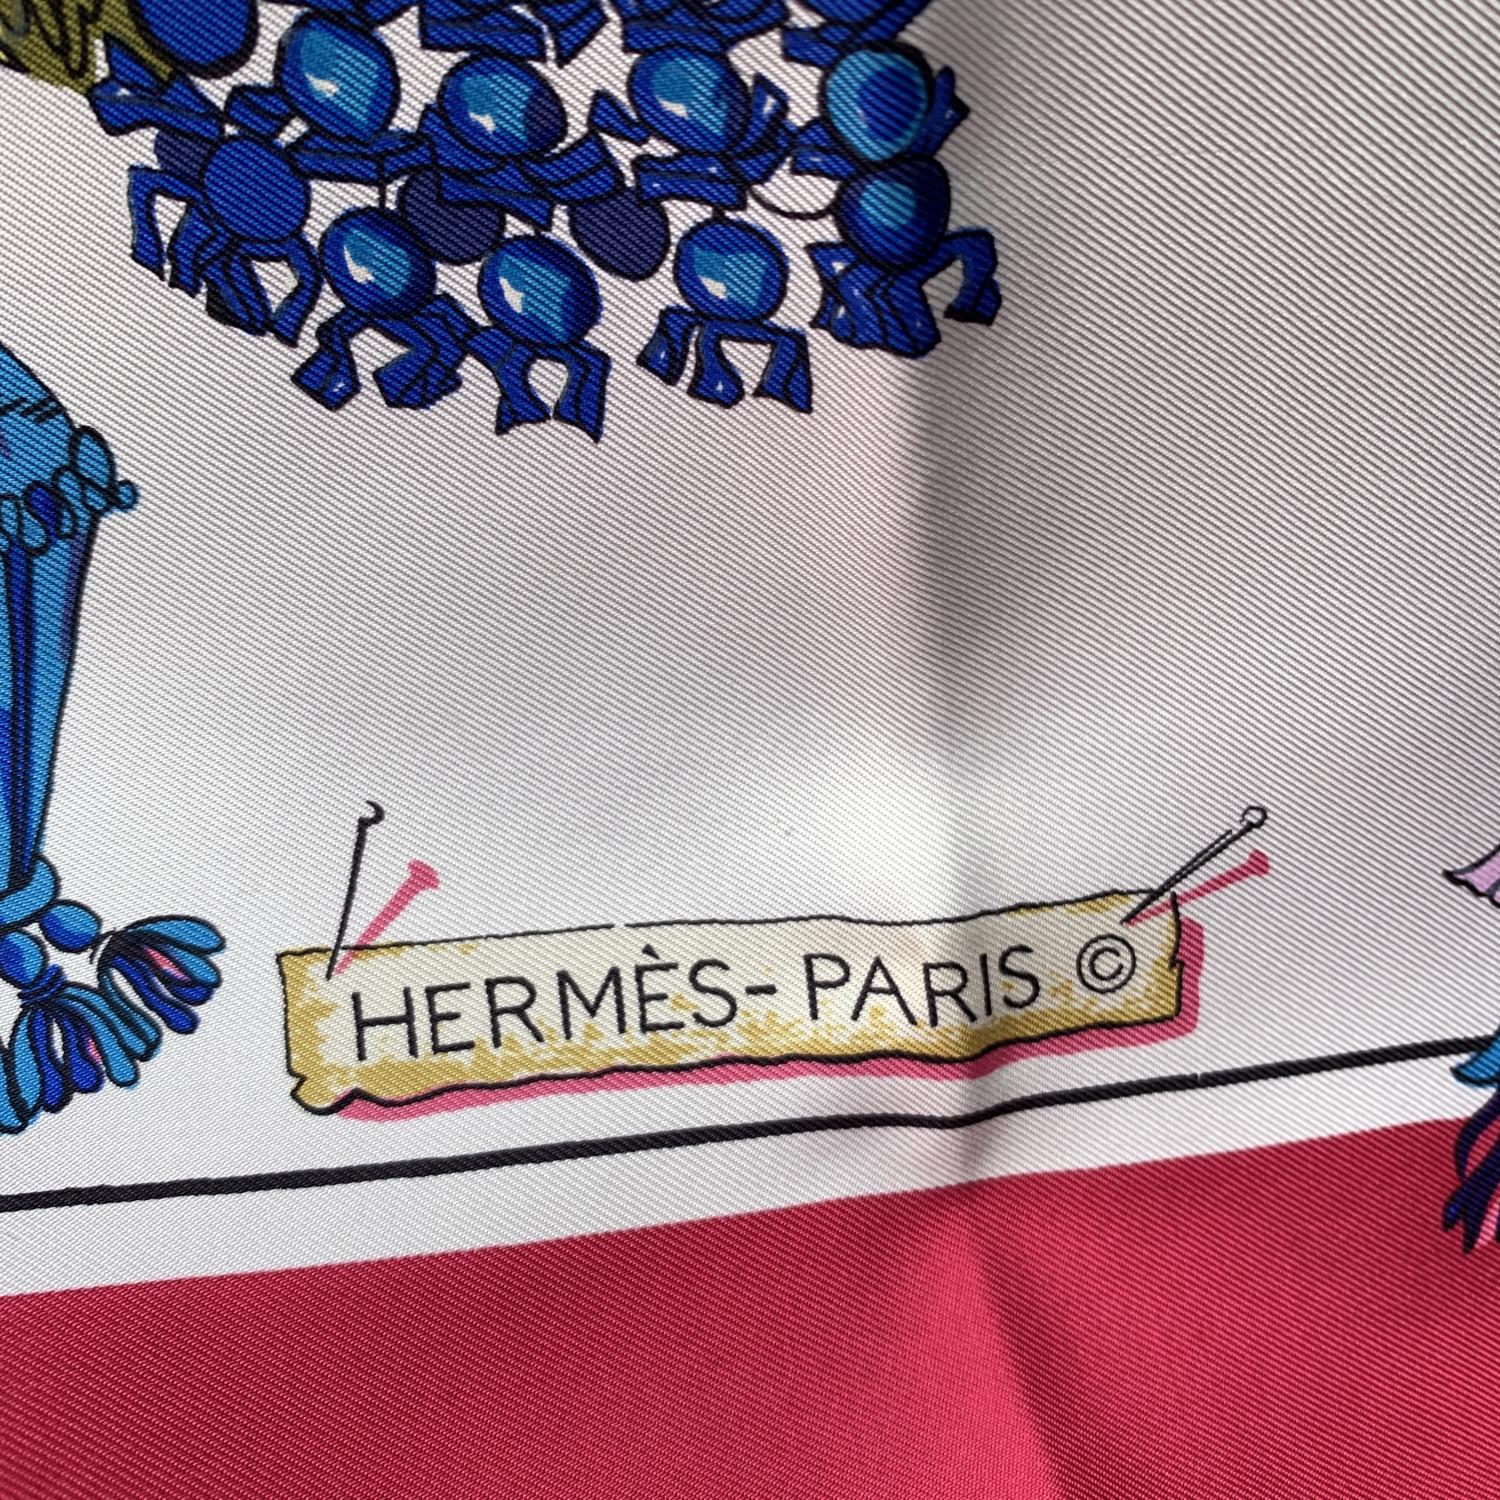 Hermes Vintage Silk Scarf Passementerie Heron 1960 Tassels Red In Good Condition For Sale In Rome, Rome